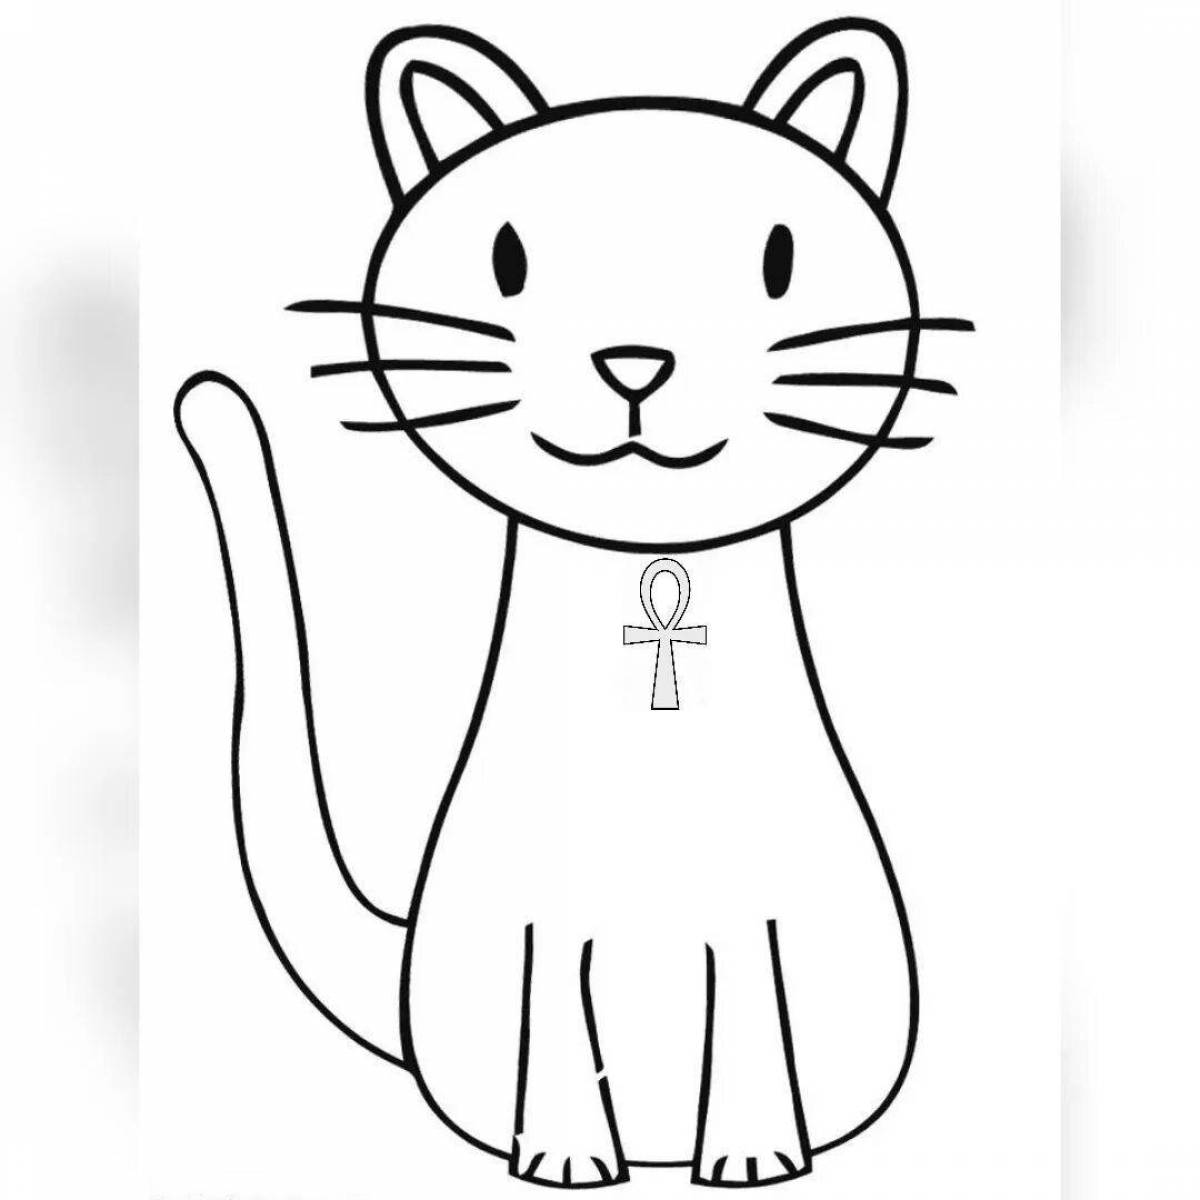 Animated cat coloring book for children 4-5 years old